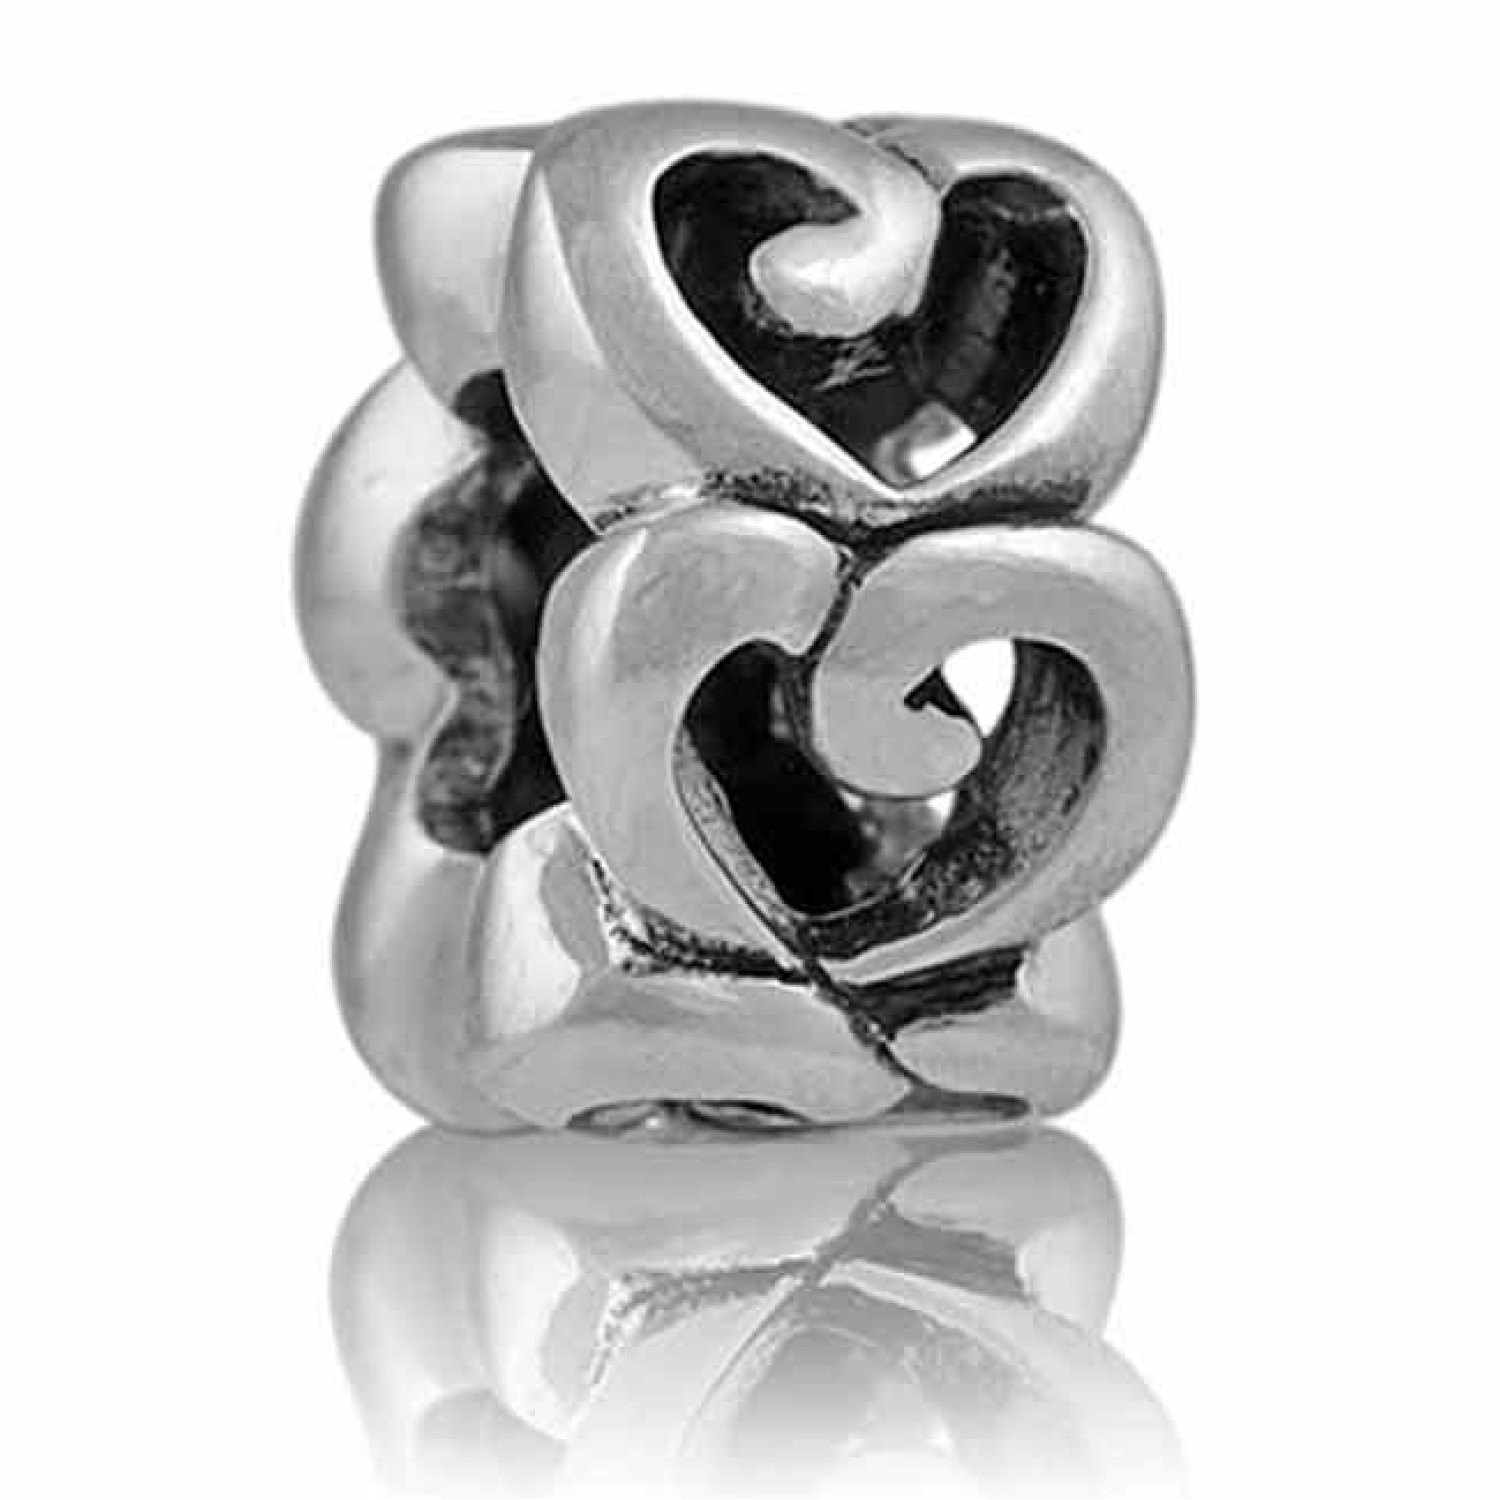 LK119 Evolve NZ Charms - Love. Evolve New Zealand - LK119 Evolve NZ Charms - Love Our row of hearts symbolise love. Each heart connects us with the people who we cherish the most. Sterling Silver Christies exclusive 5 year guarantee Compatible with @chris